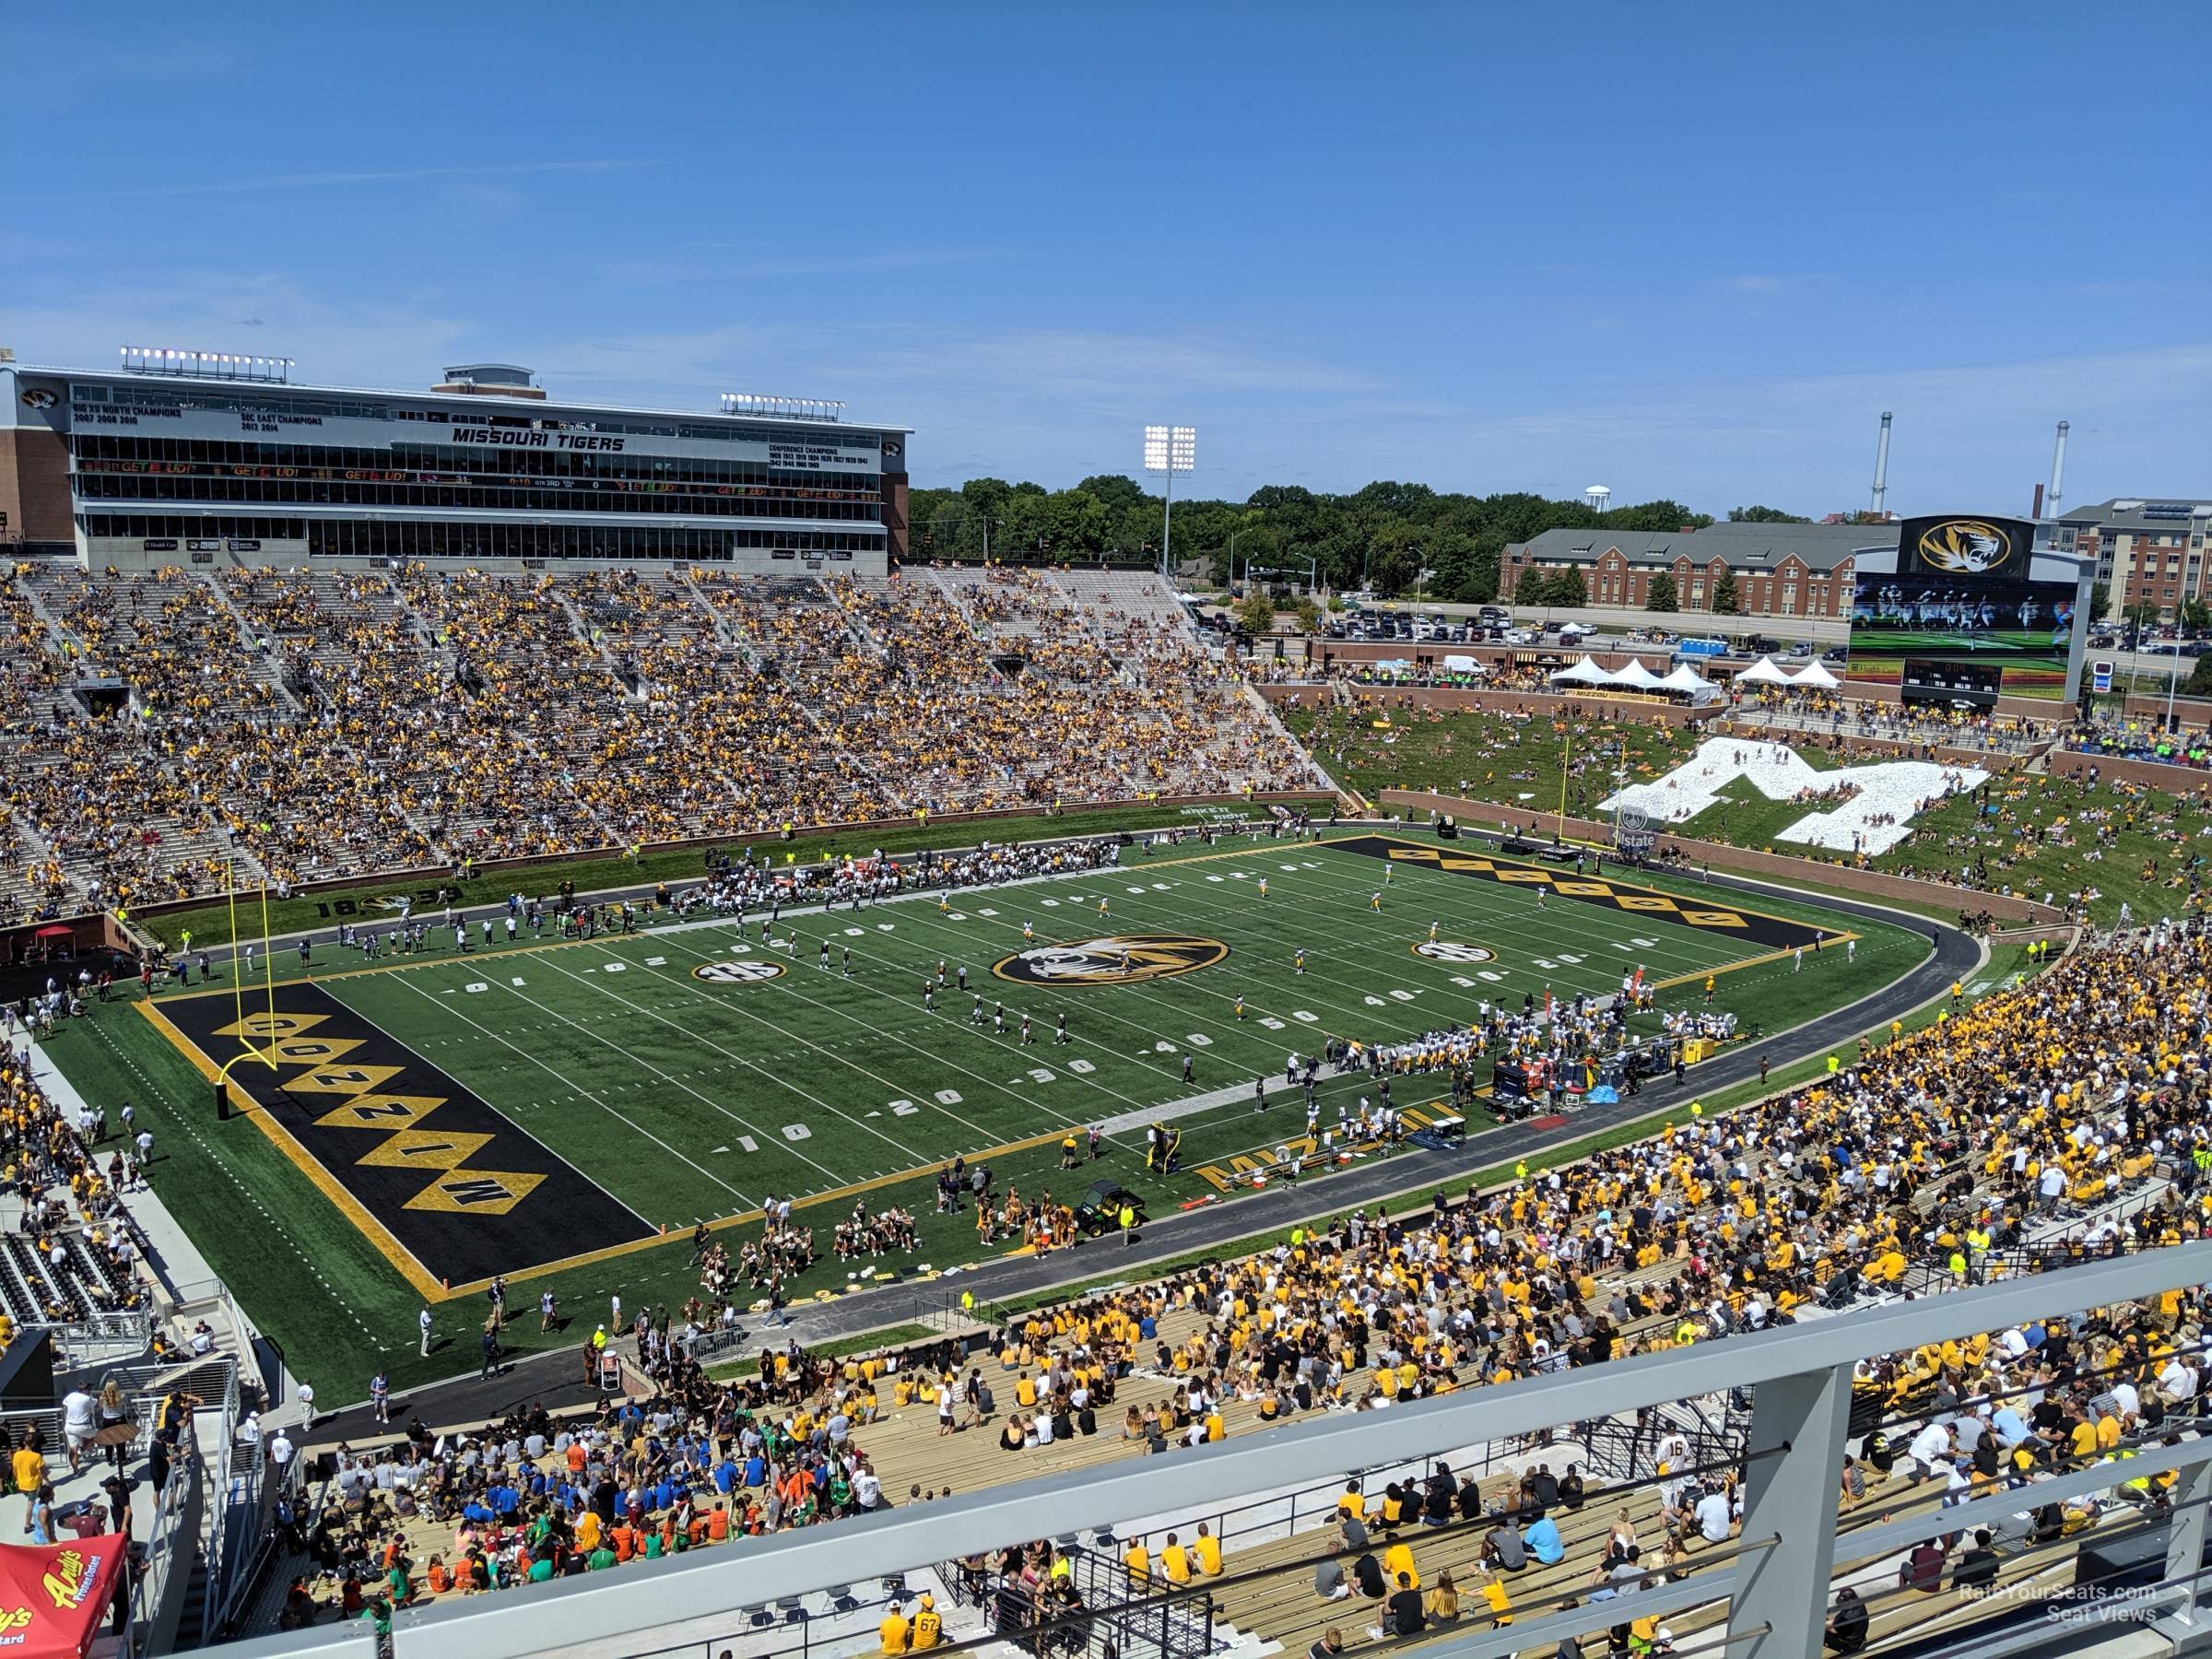 section 301, row 4 seat view  - faurot field